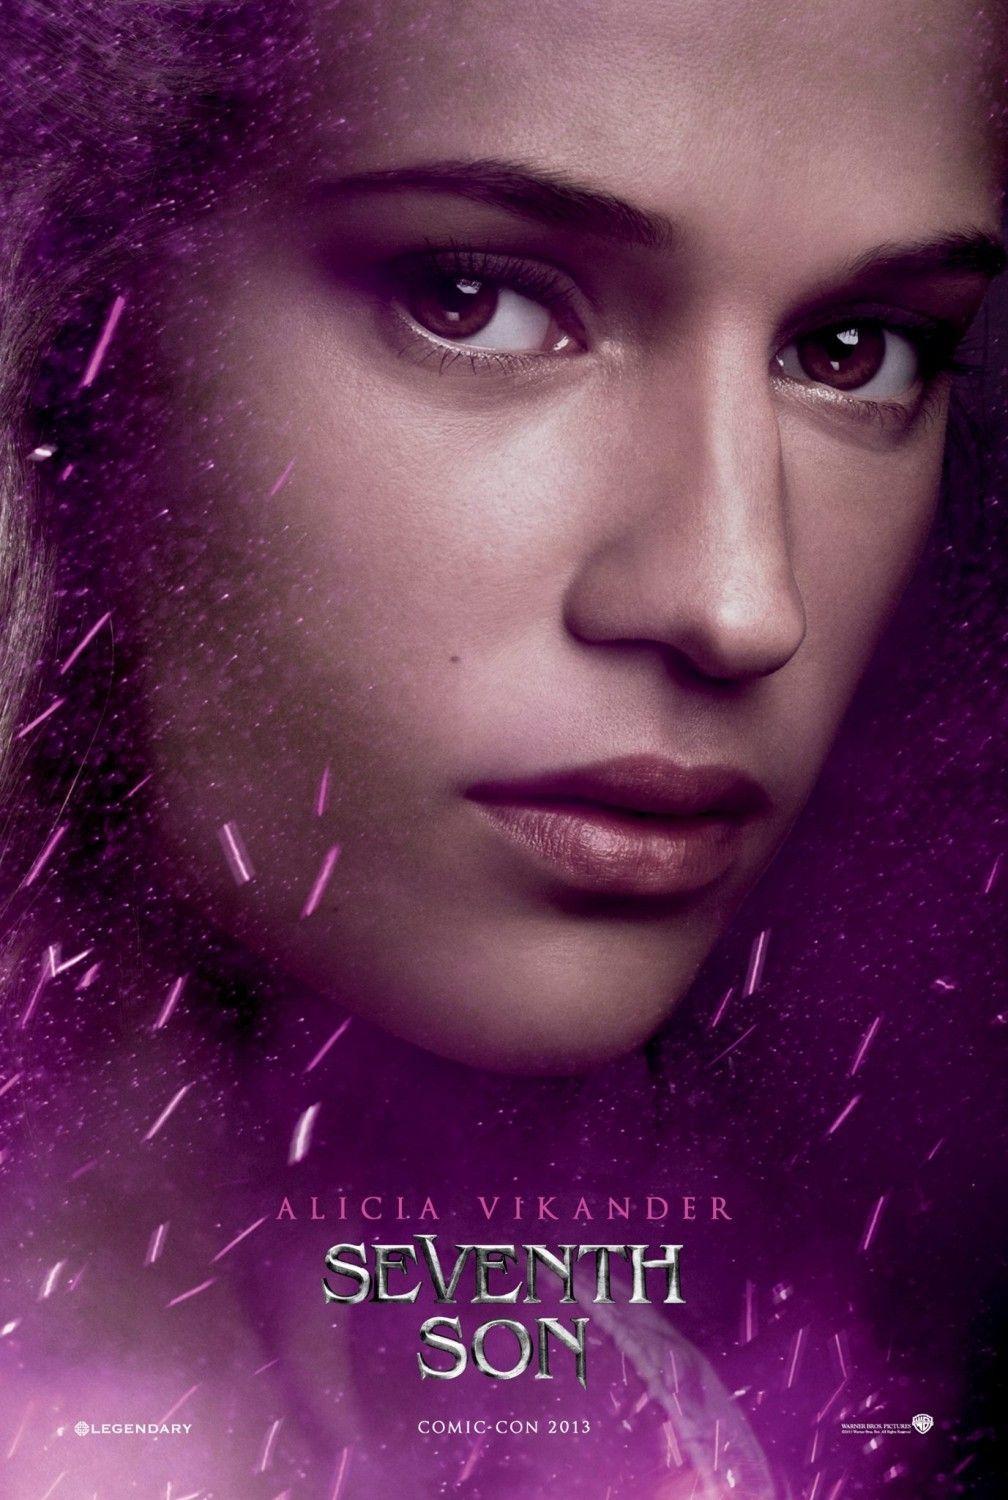 SEVENTH SON movie poster featuring Alicia Vikander. Movie Posters